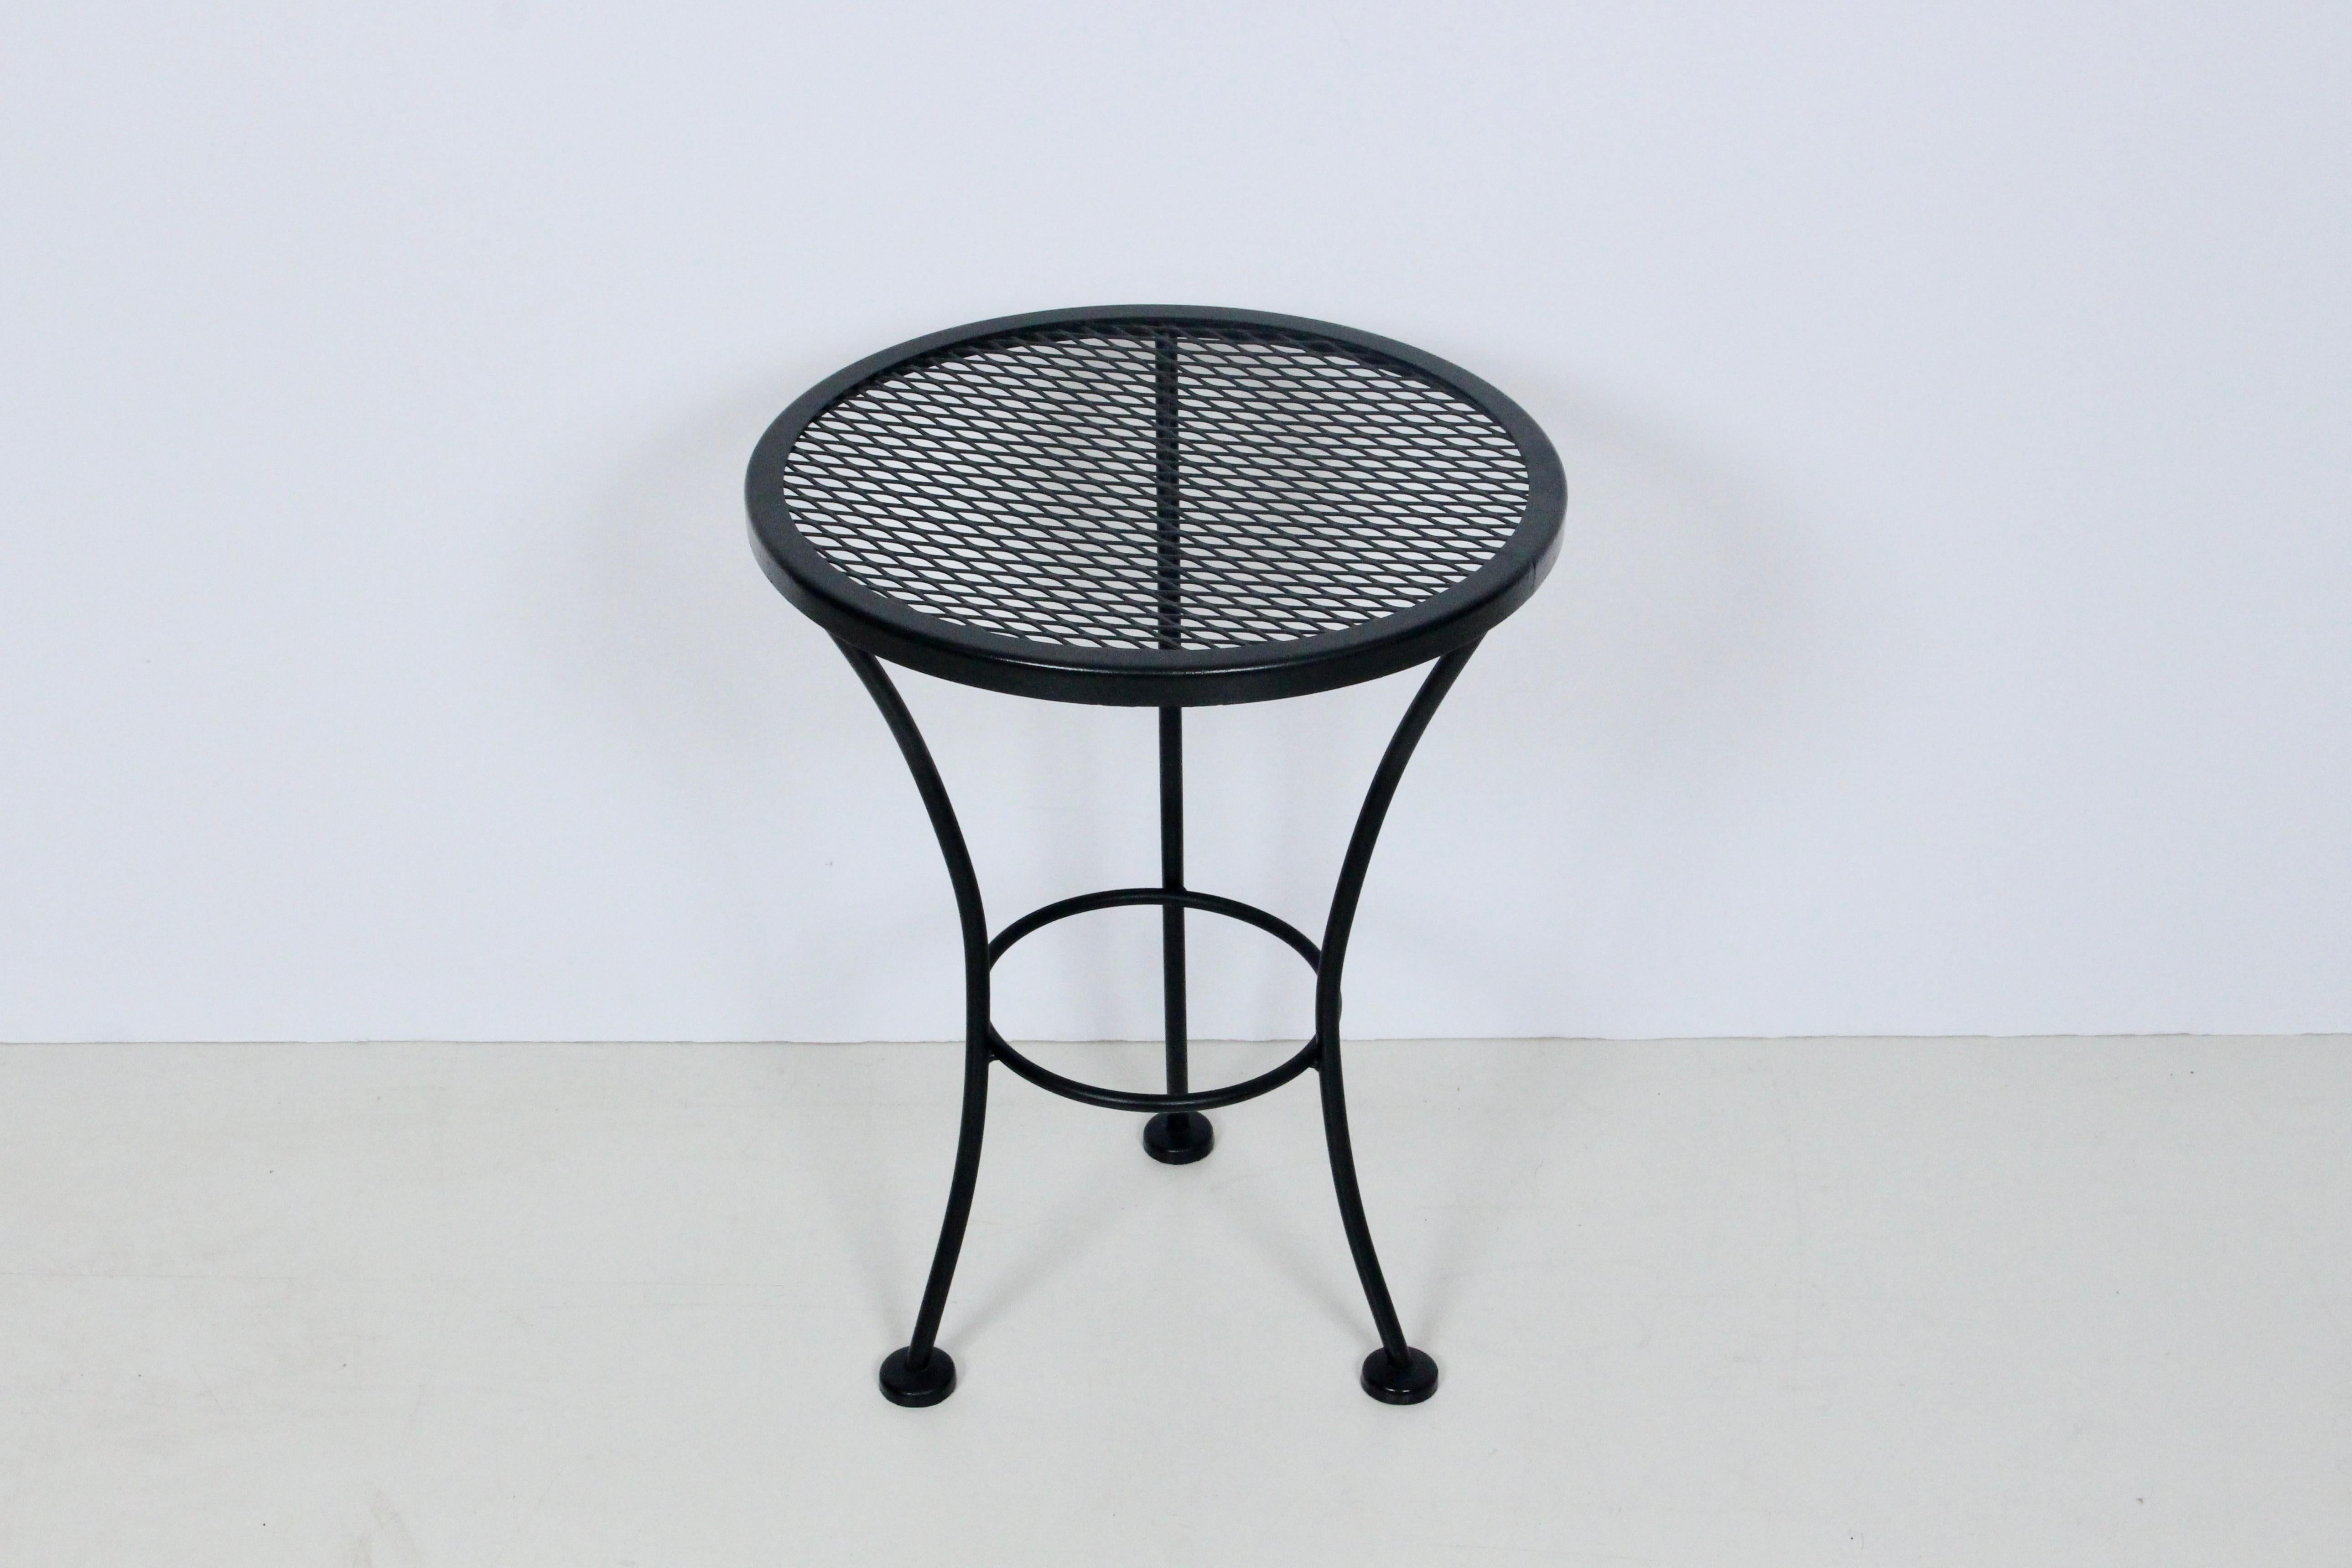 Enameled Russell Woodard Black Iron & Wire Mesh Occasional Tripod Table, 1950's For Sale